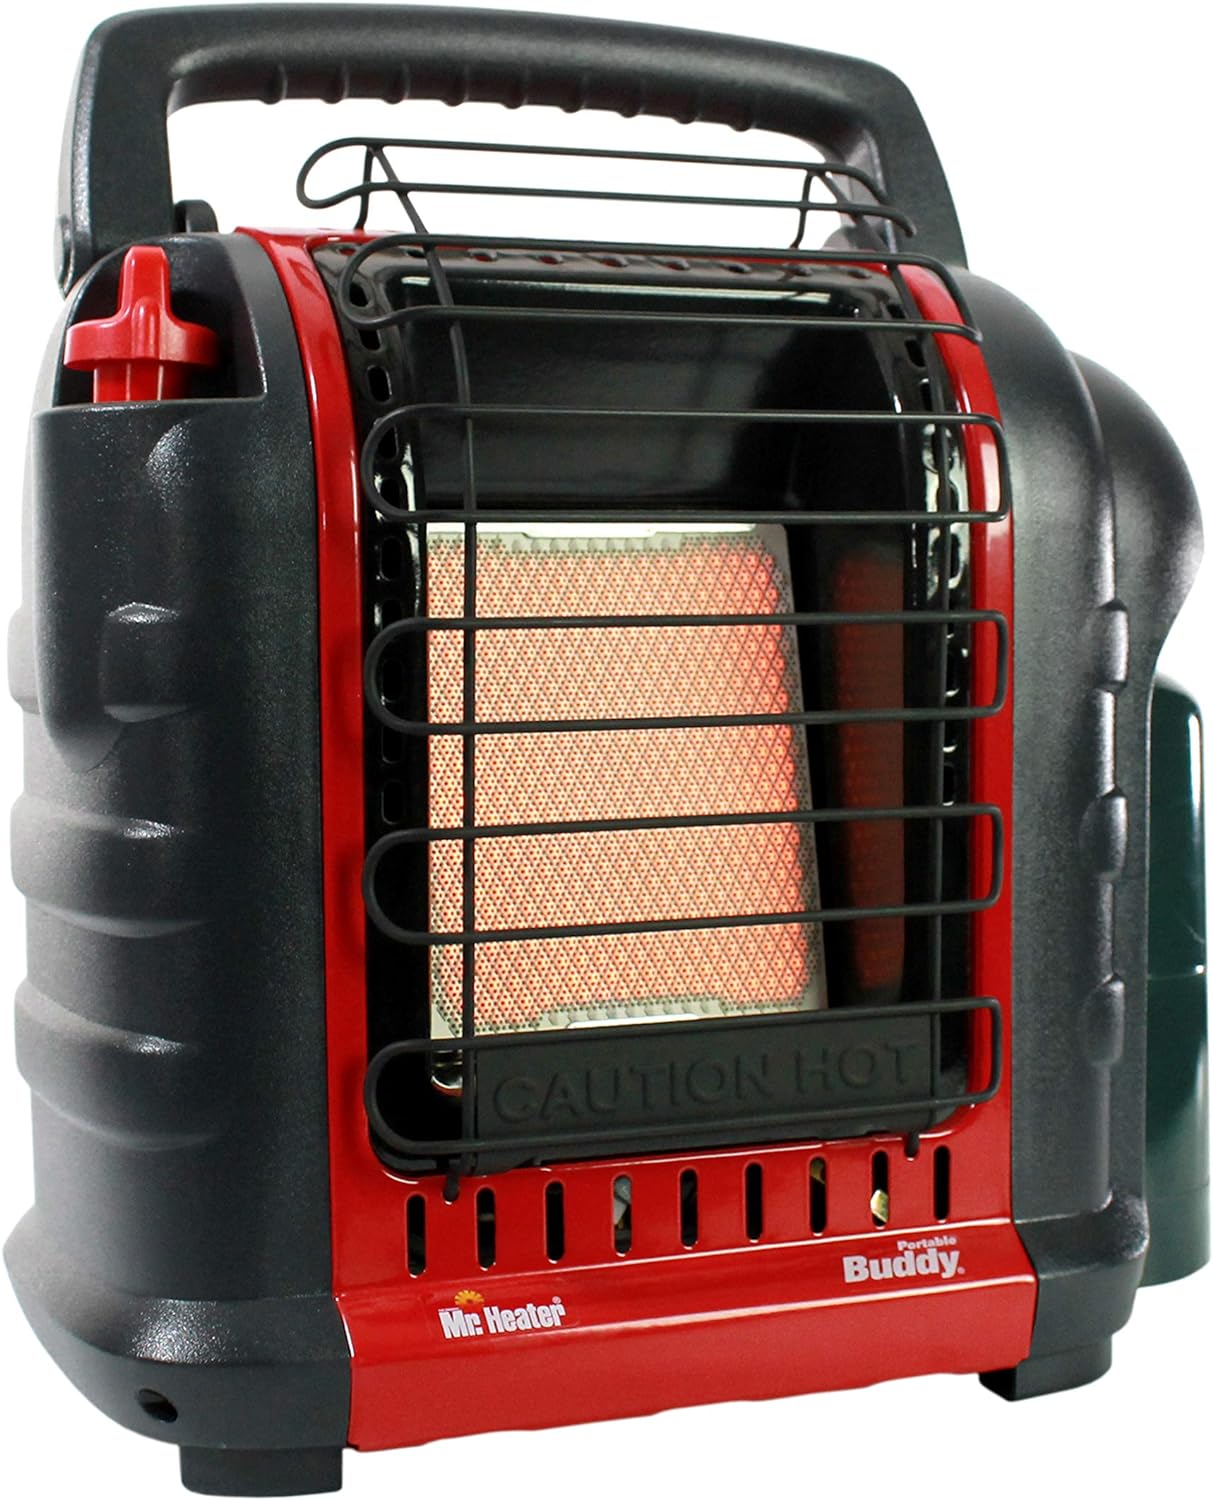 Mr. Heater F232000 MH9BX Buddy 4,000-9,000-BTU Indoor-Safe Portable Propane Radiant Heater, Red-Black - Mr. Heater F232000 MH9BX Buddy 4,000-9,000-BTU Indoor-Safe Portable Propane Radiant Heater Review